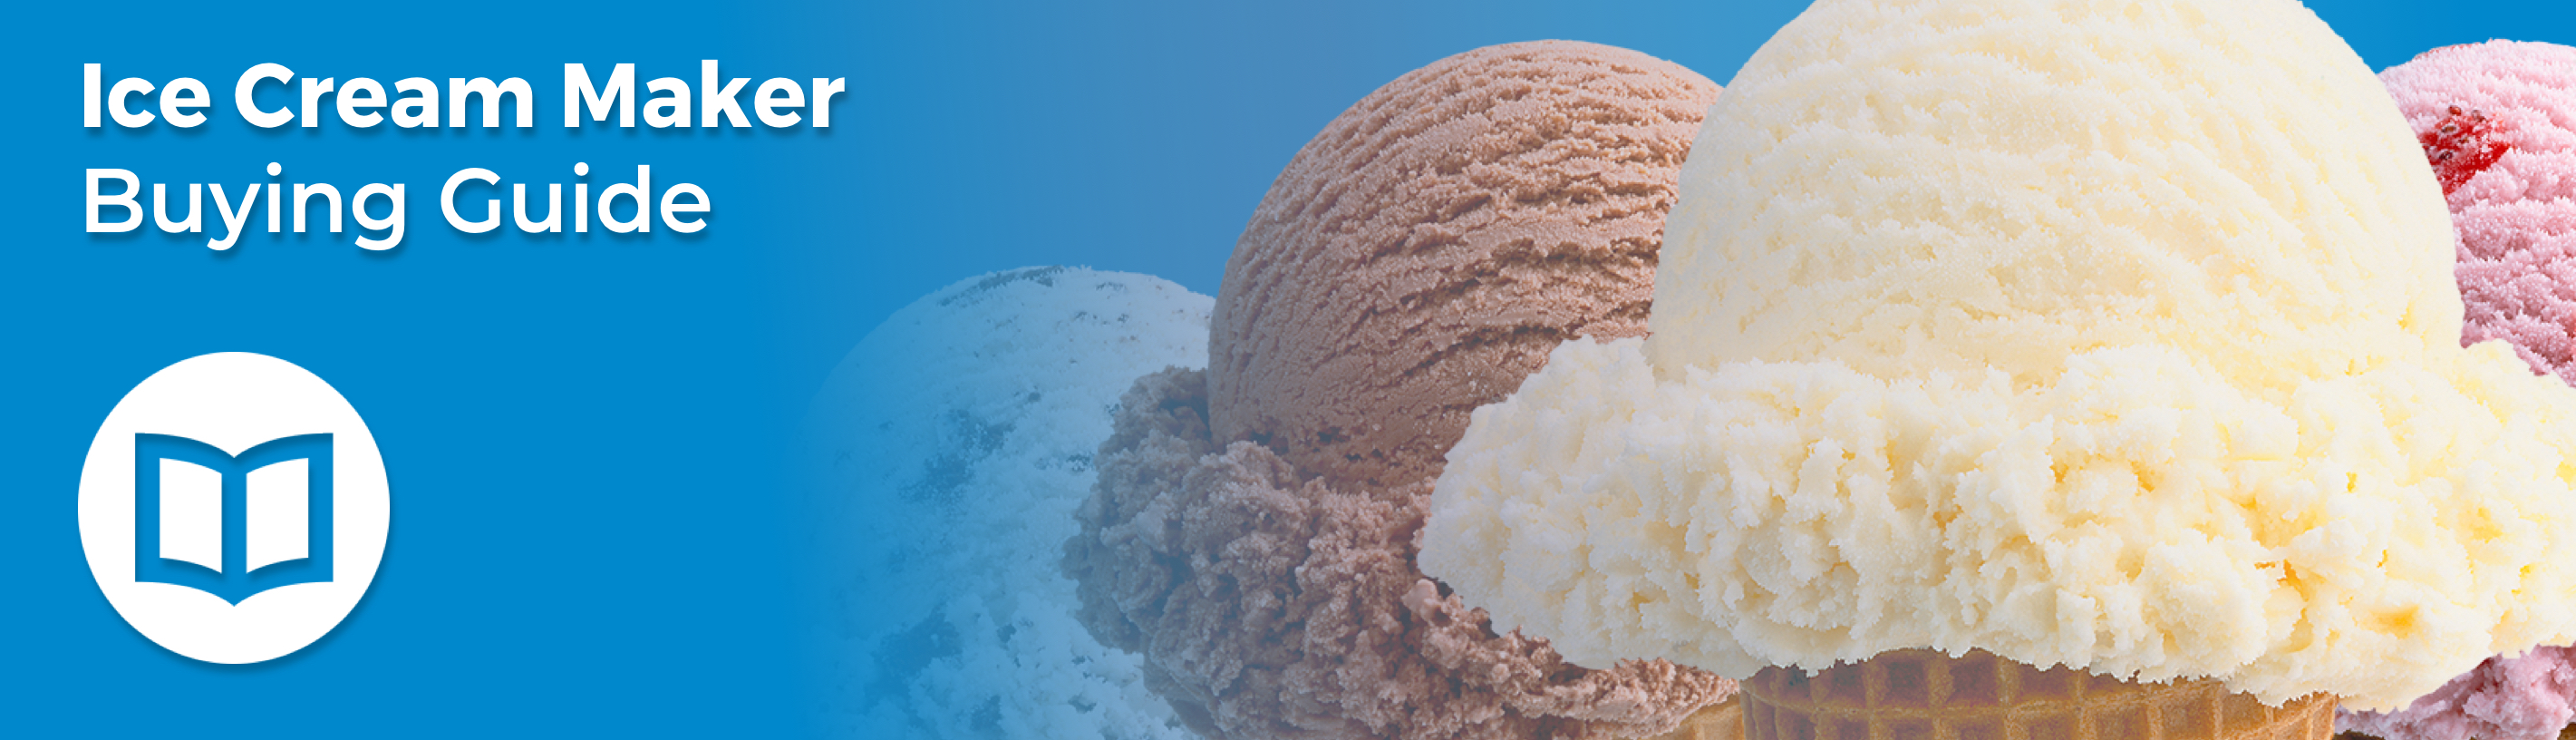 Types of Ice Cream Machines: Buying Guide